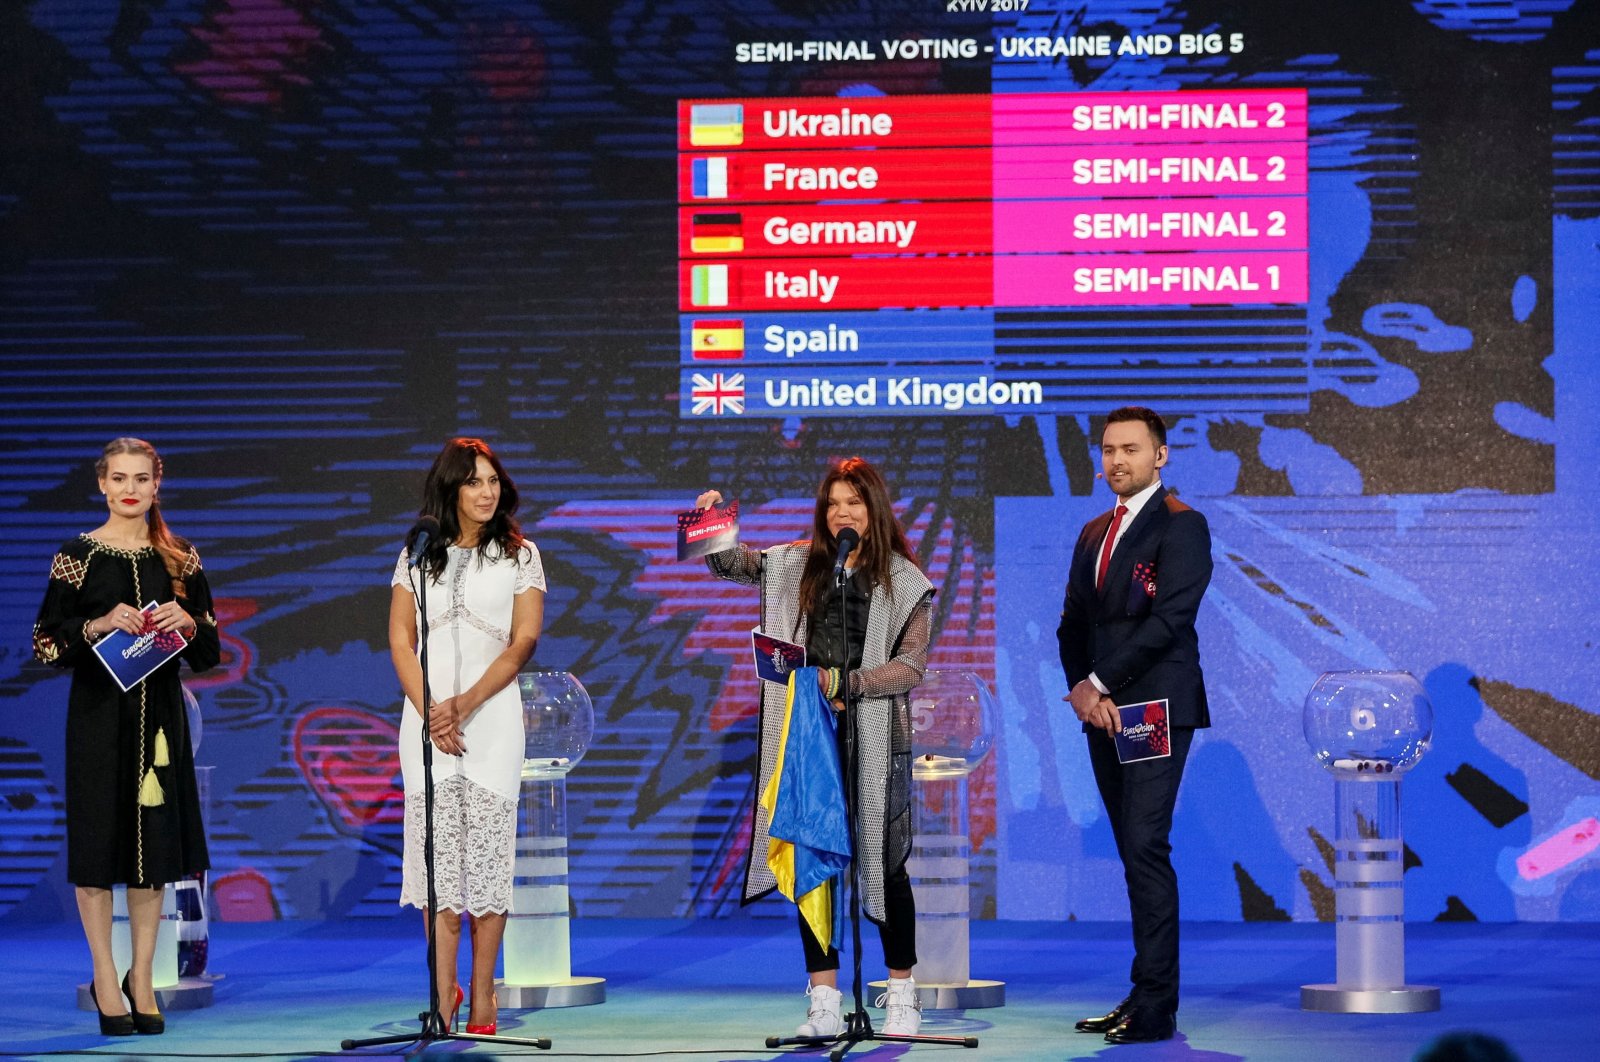 Crimean Tatar singer Susana Jamaladinova (2nd L), known as Jamala, and Ukrainian singer Ruslana Lyzhychko (2nd R) attend the draw for the semi-finals of the 2017 Eurovision Song Contest in Kiev, Ukraine Jan. 31, 2017. (Reuters File Photo)